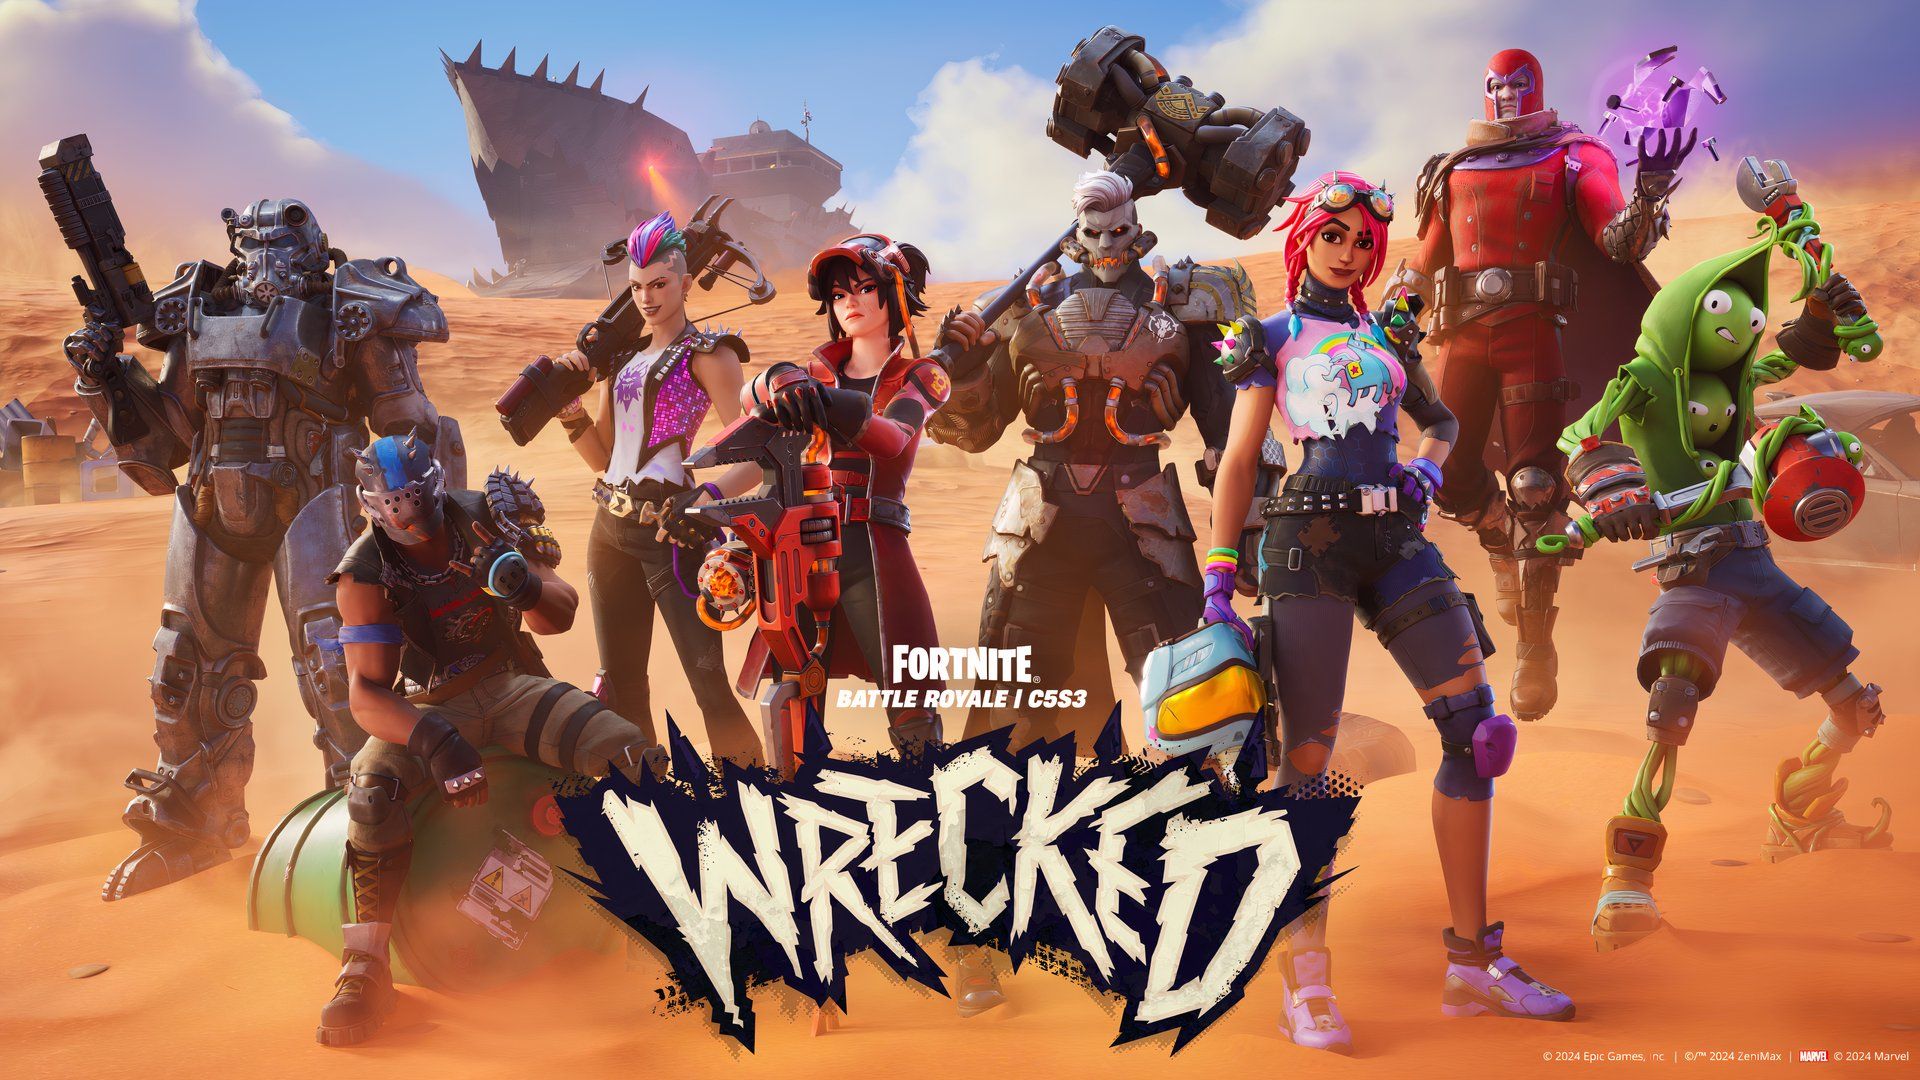 Official Fortnite Chapter 5 Season 3 image featuring T-60 power armor from Fallout and Wasteland Magneto standing in the dusty desert wasteland on the Fortnite island